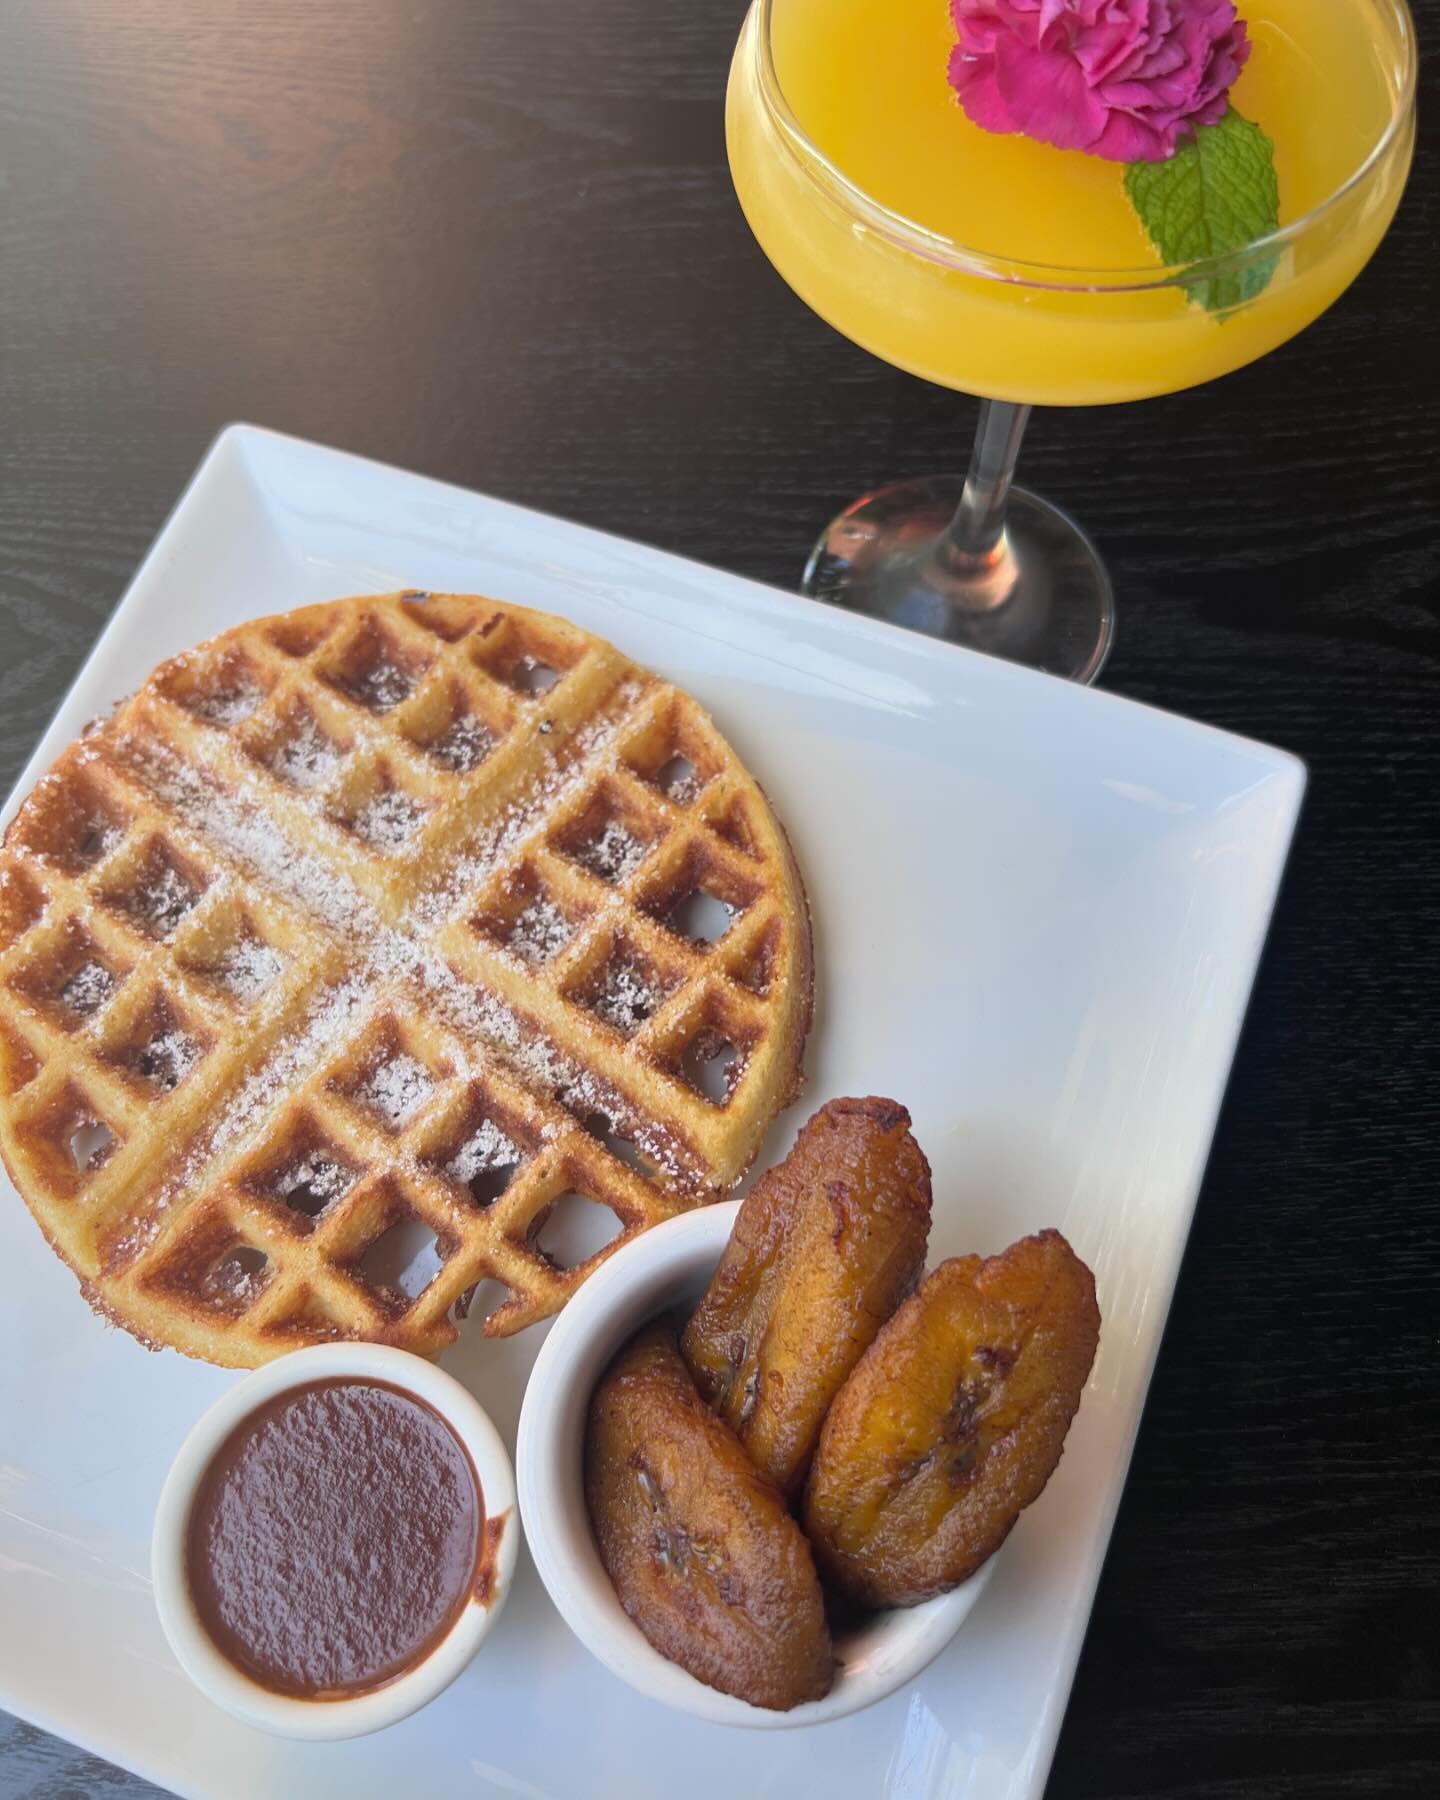 Brunch today until 4pm! Grab your bestie and head down for sweet plantains with waffles or steak &amp; eggs! Guatemalan inspired brunch classics! Enjoy a Mimosa or Ume Margarita! 

#eastbaybrunch #oakland #oldoakland #eastbateats #craftcocktails